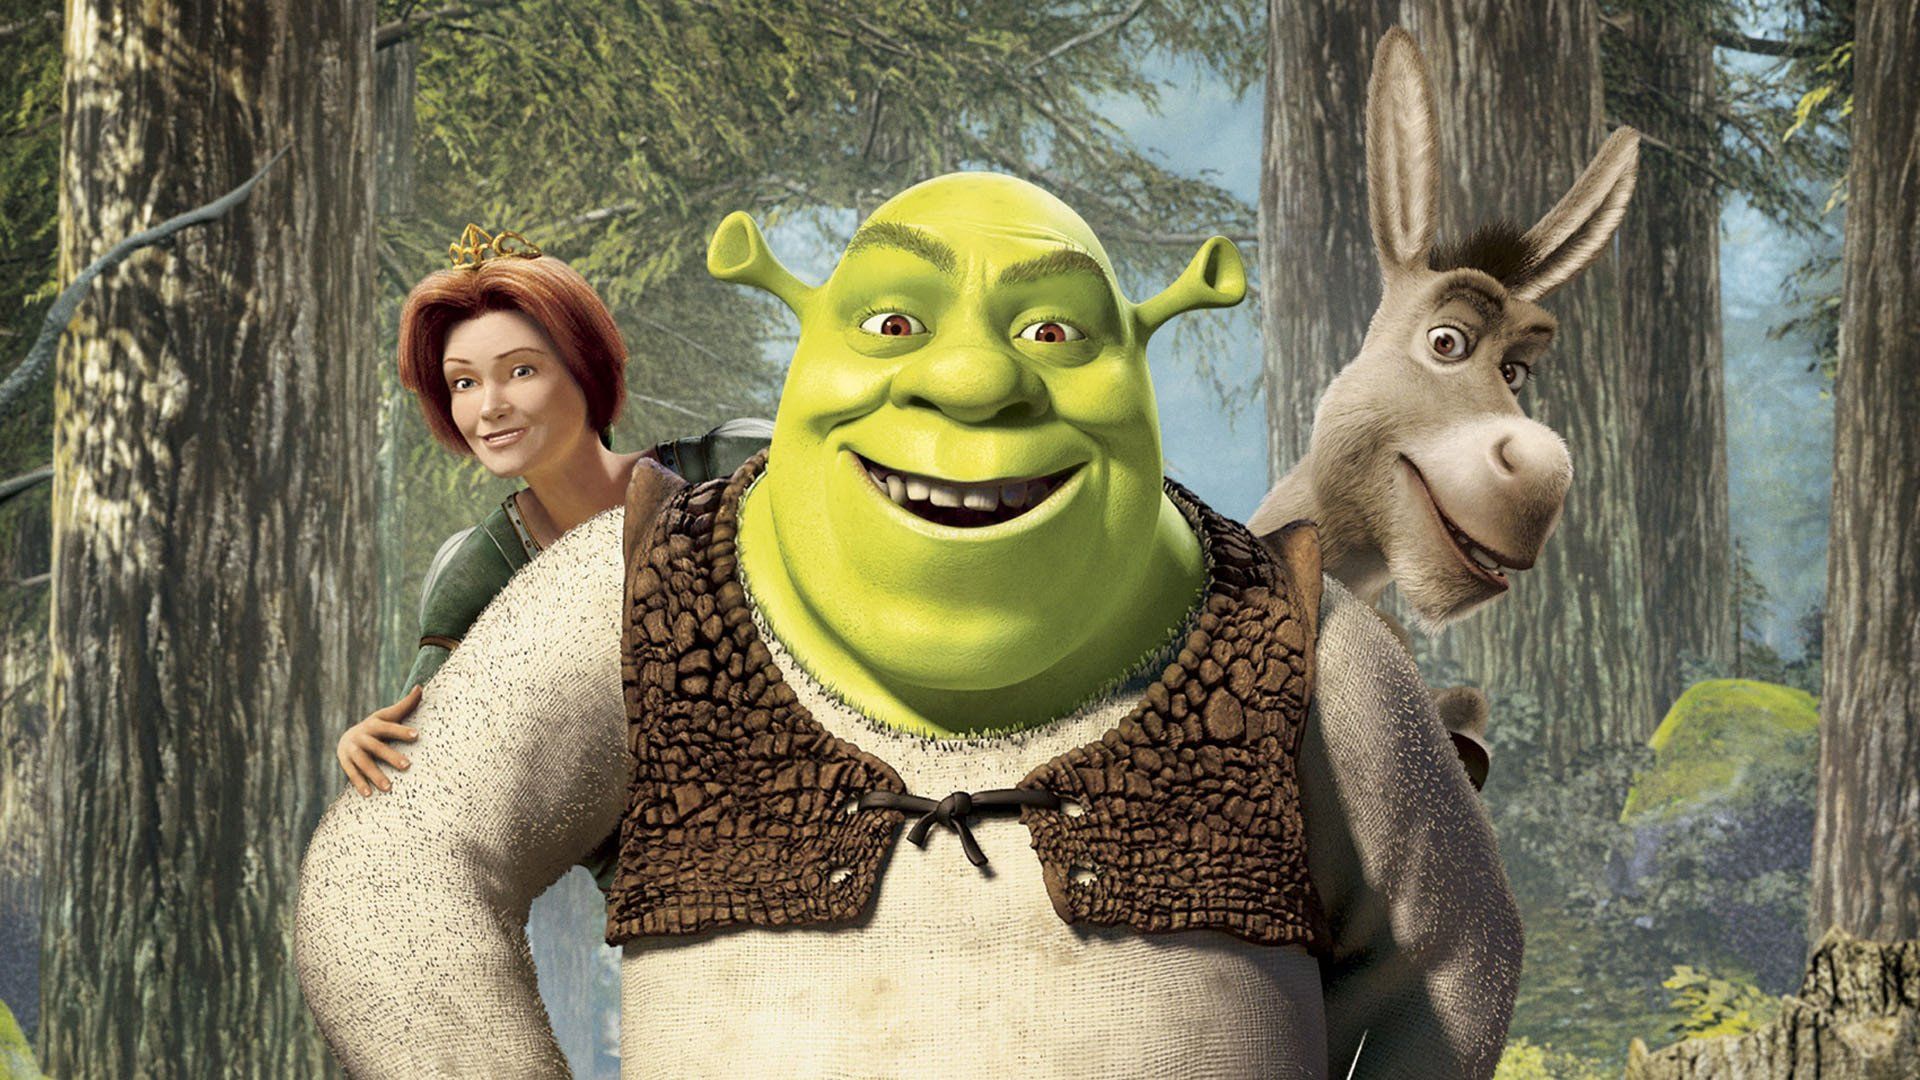 Shrek, Donkey, and Princess Fiona standing in a forest - Shrek